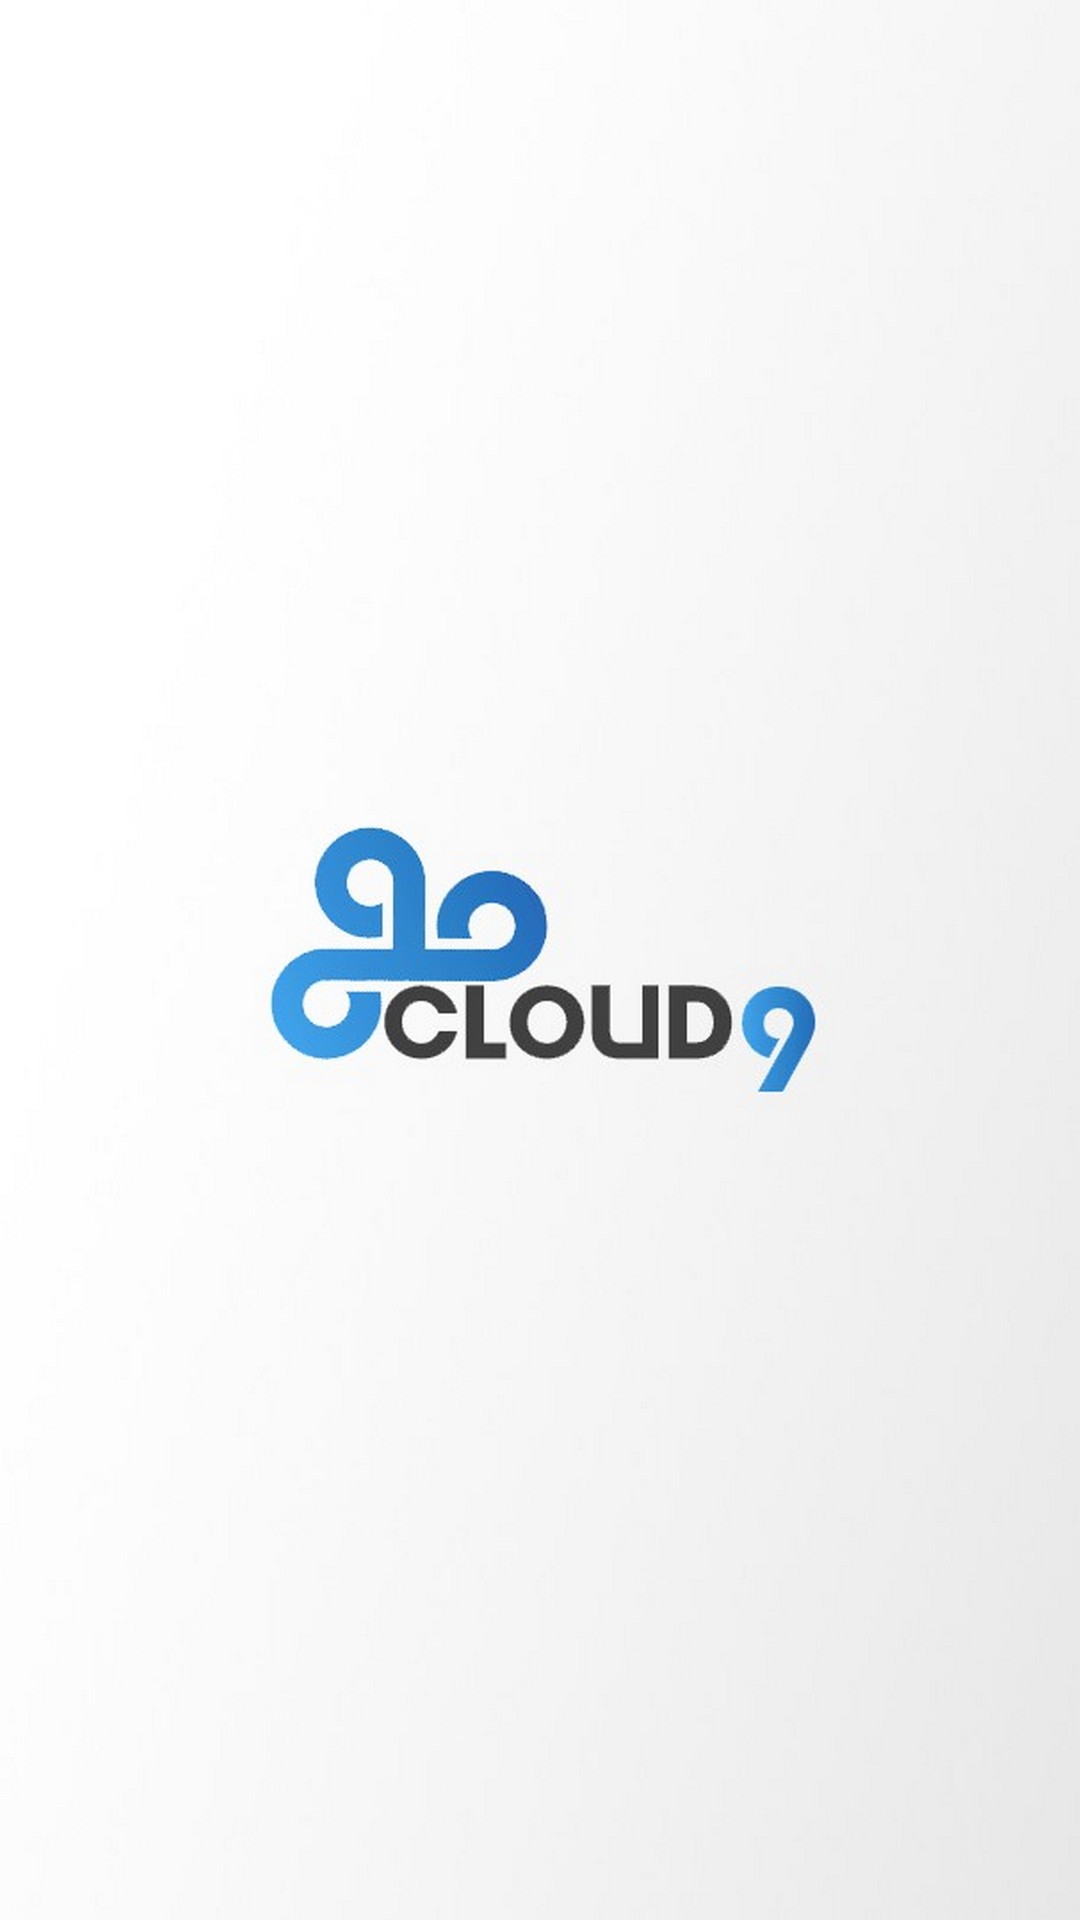 Wallpapers Cloud9 resolution 1080x1920